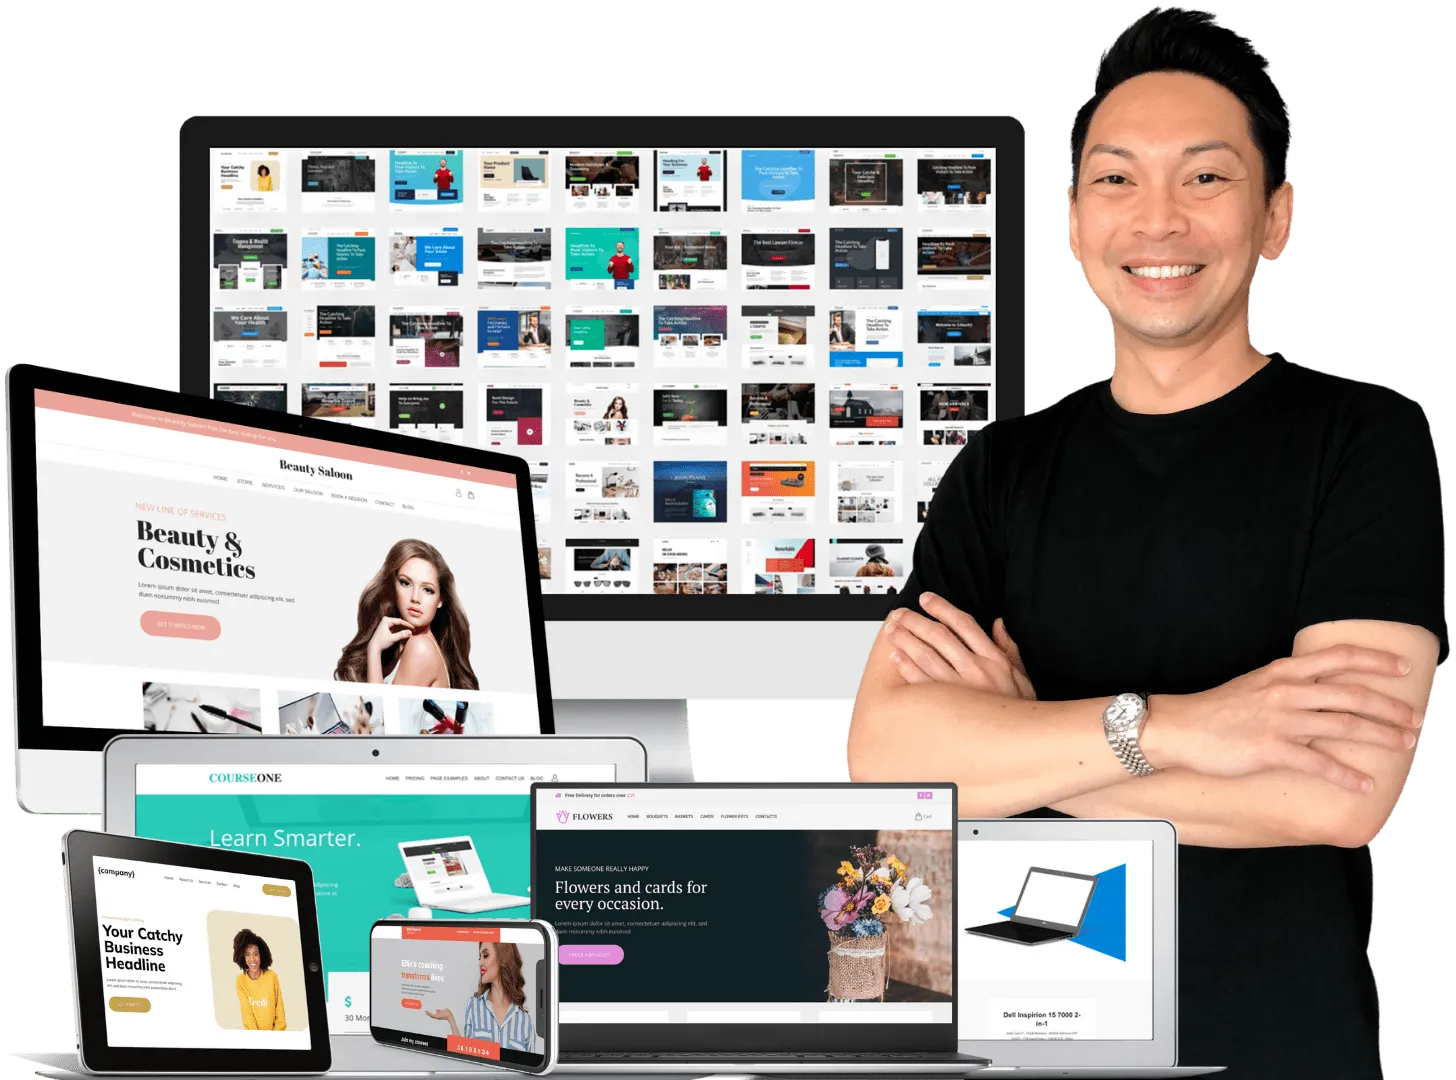 Ad Guys & Co All-In-One Digital Marketing Software